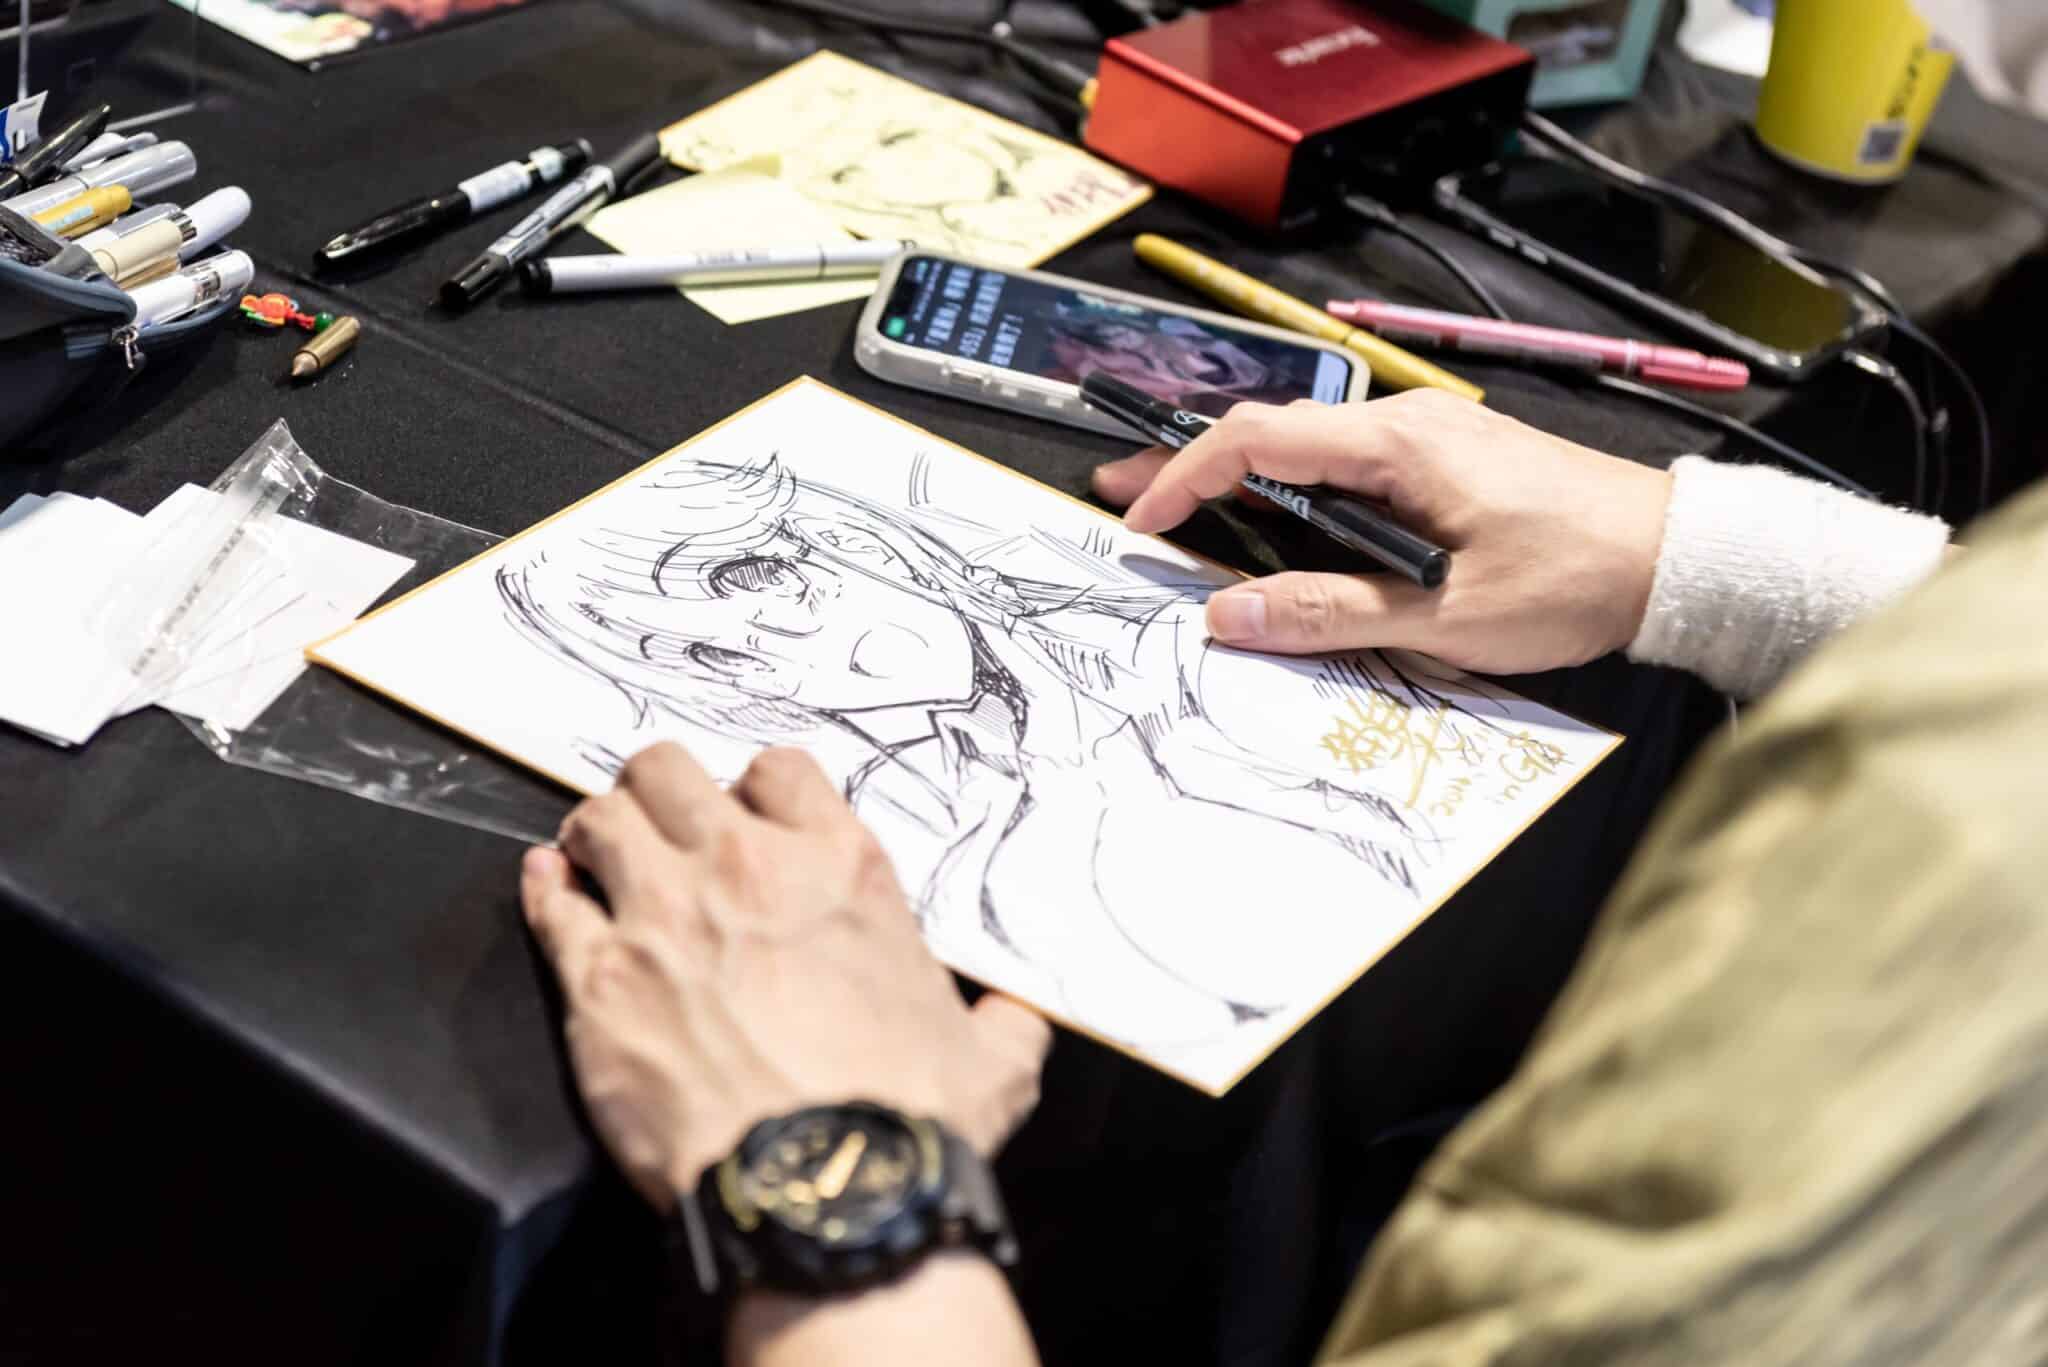 game illustrator doing live drawing at G-EIGHT game show